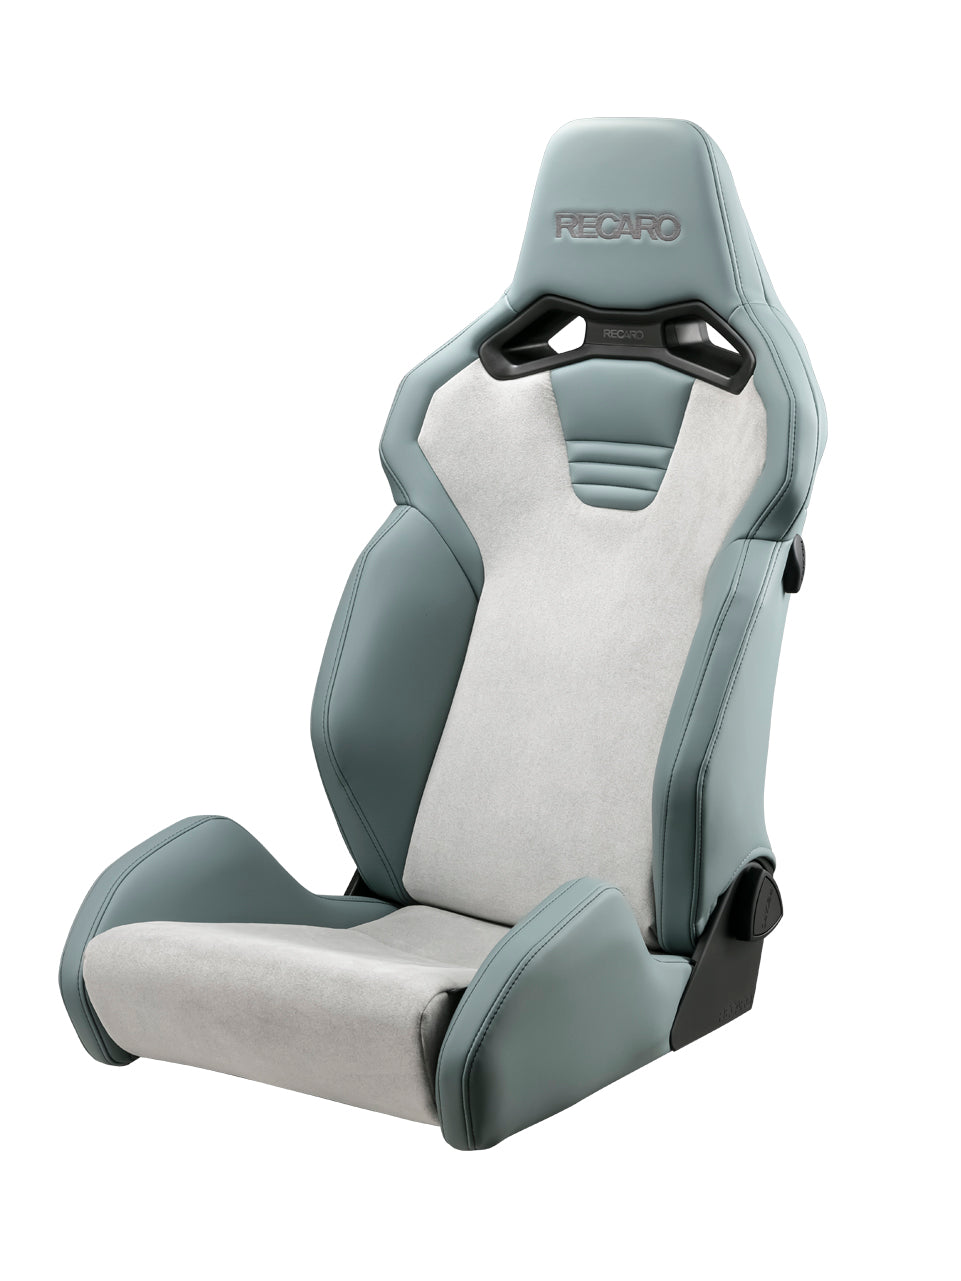 RECARO SR-S UT100 MG SG ULTRA SUEDE MELANGE GRAY AND ARTIFICIAL LEATHER GRAY COLOR SEAT 81-120.20.648-0